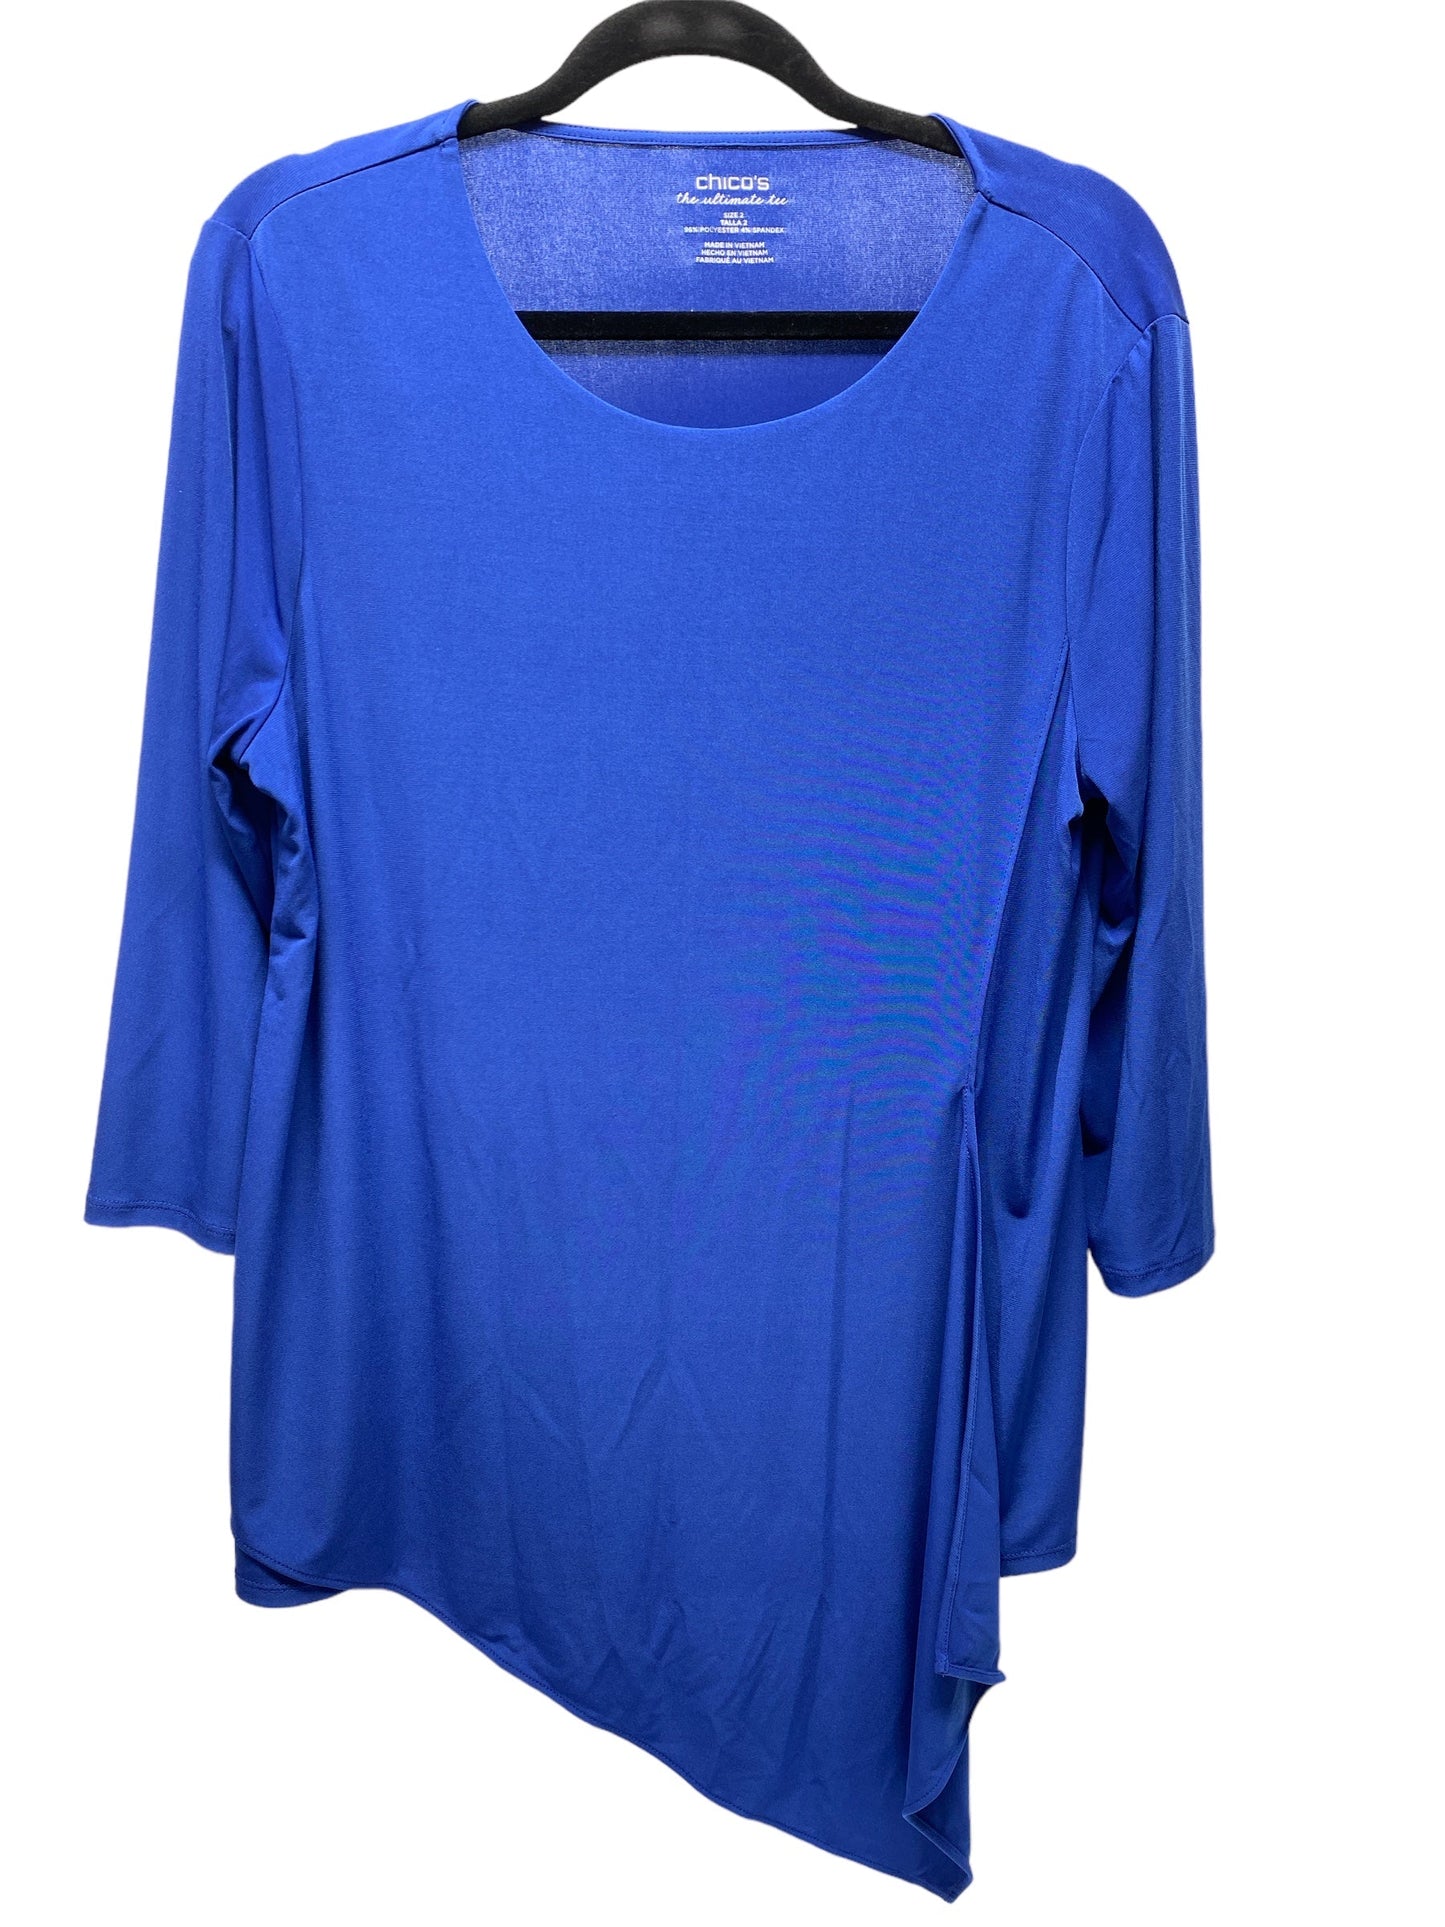 Blue Tunic 3/4 Sleeve Chicos, Size L